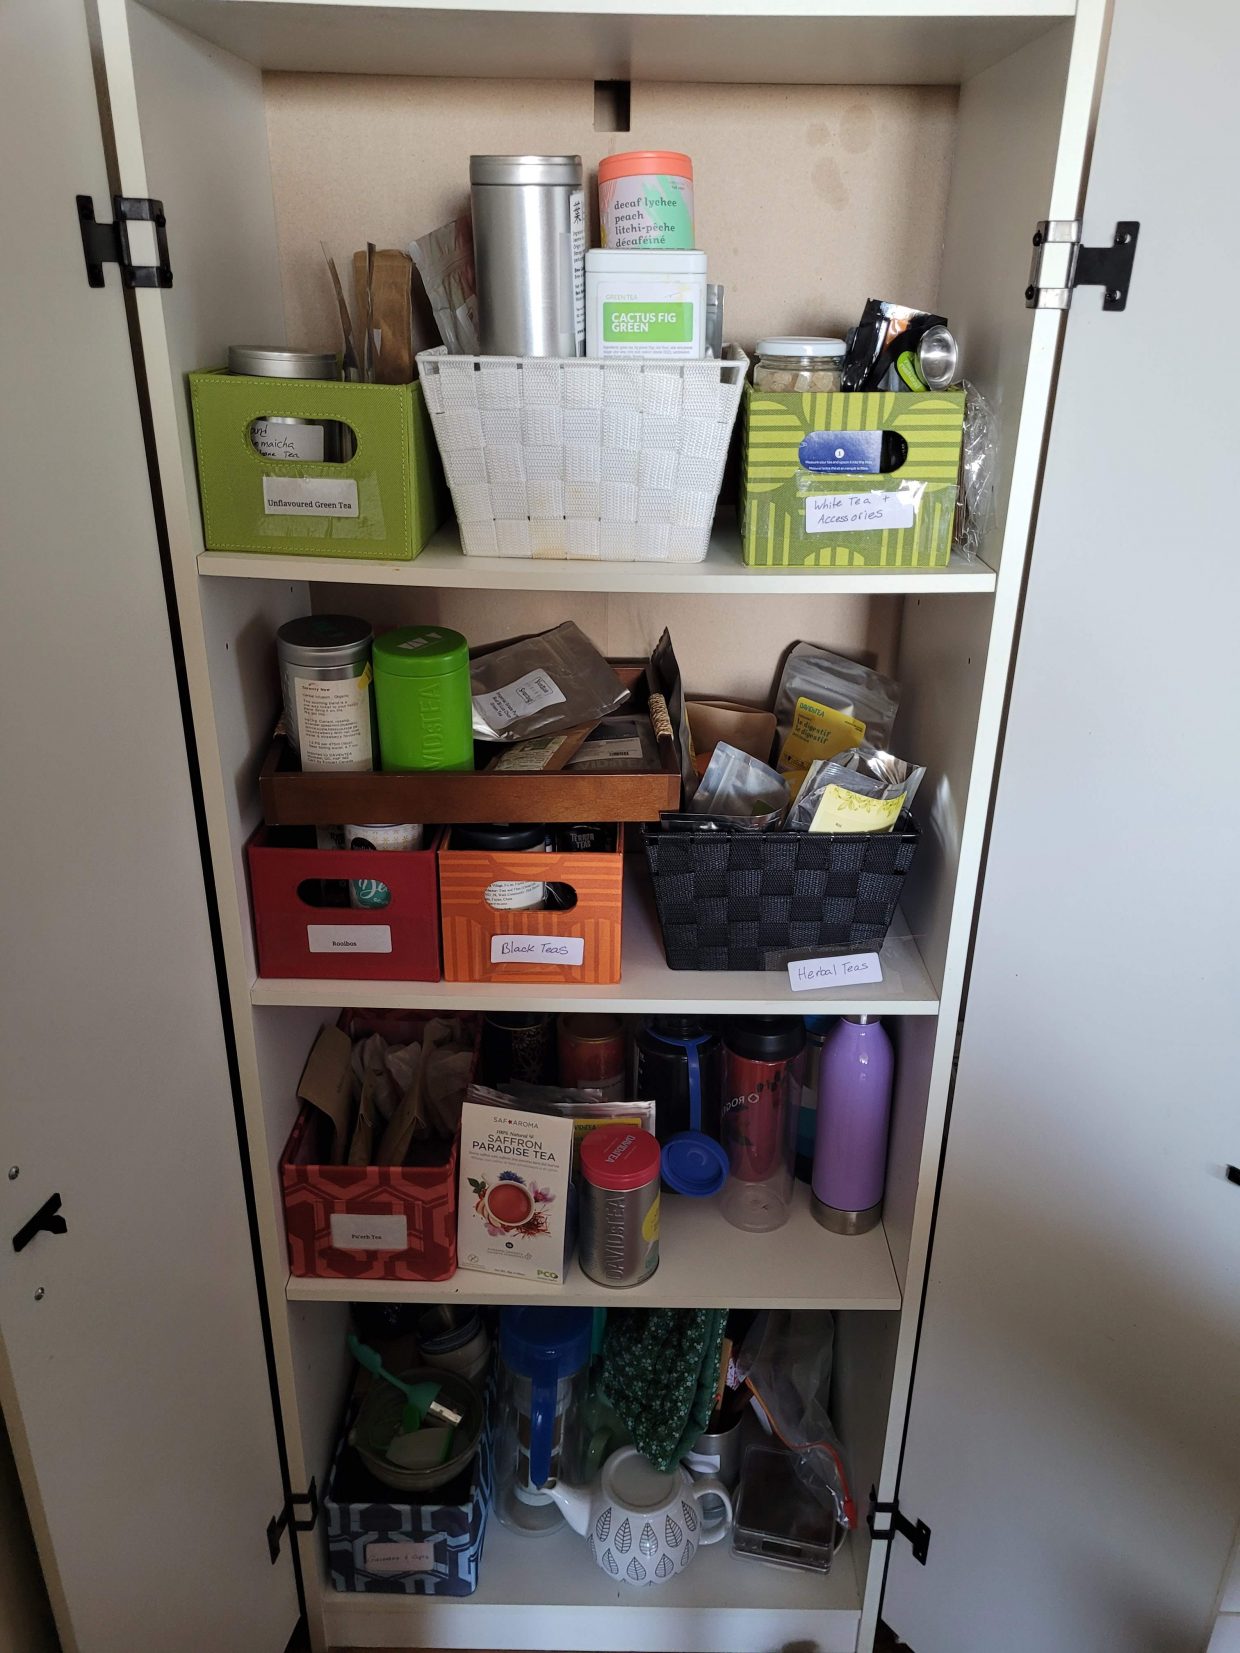 A photo of my white tea cabinet, with shelves full of different teas in smaller containers